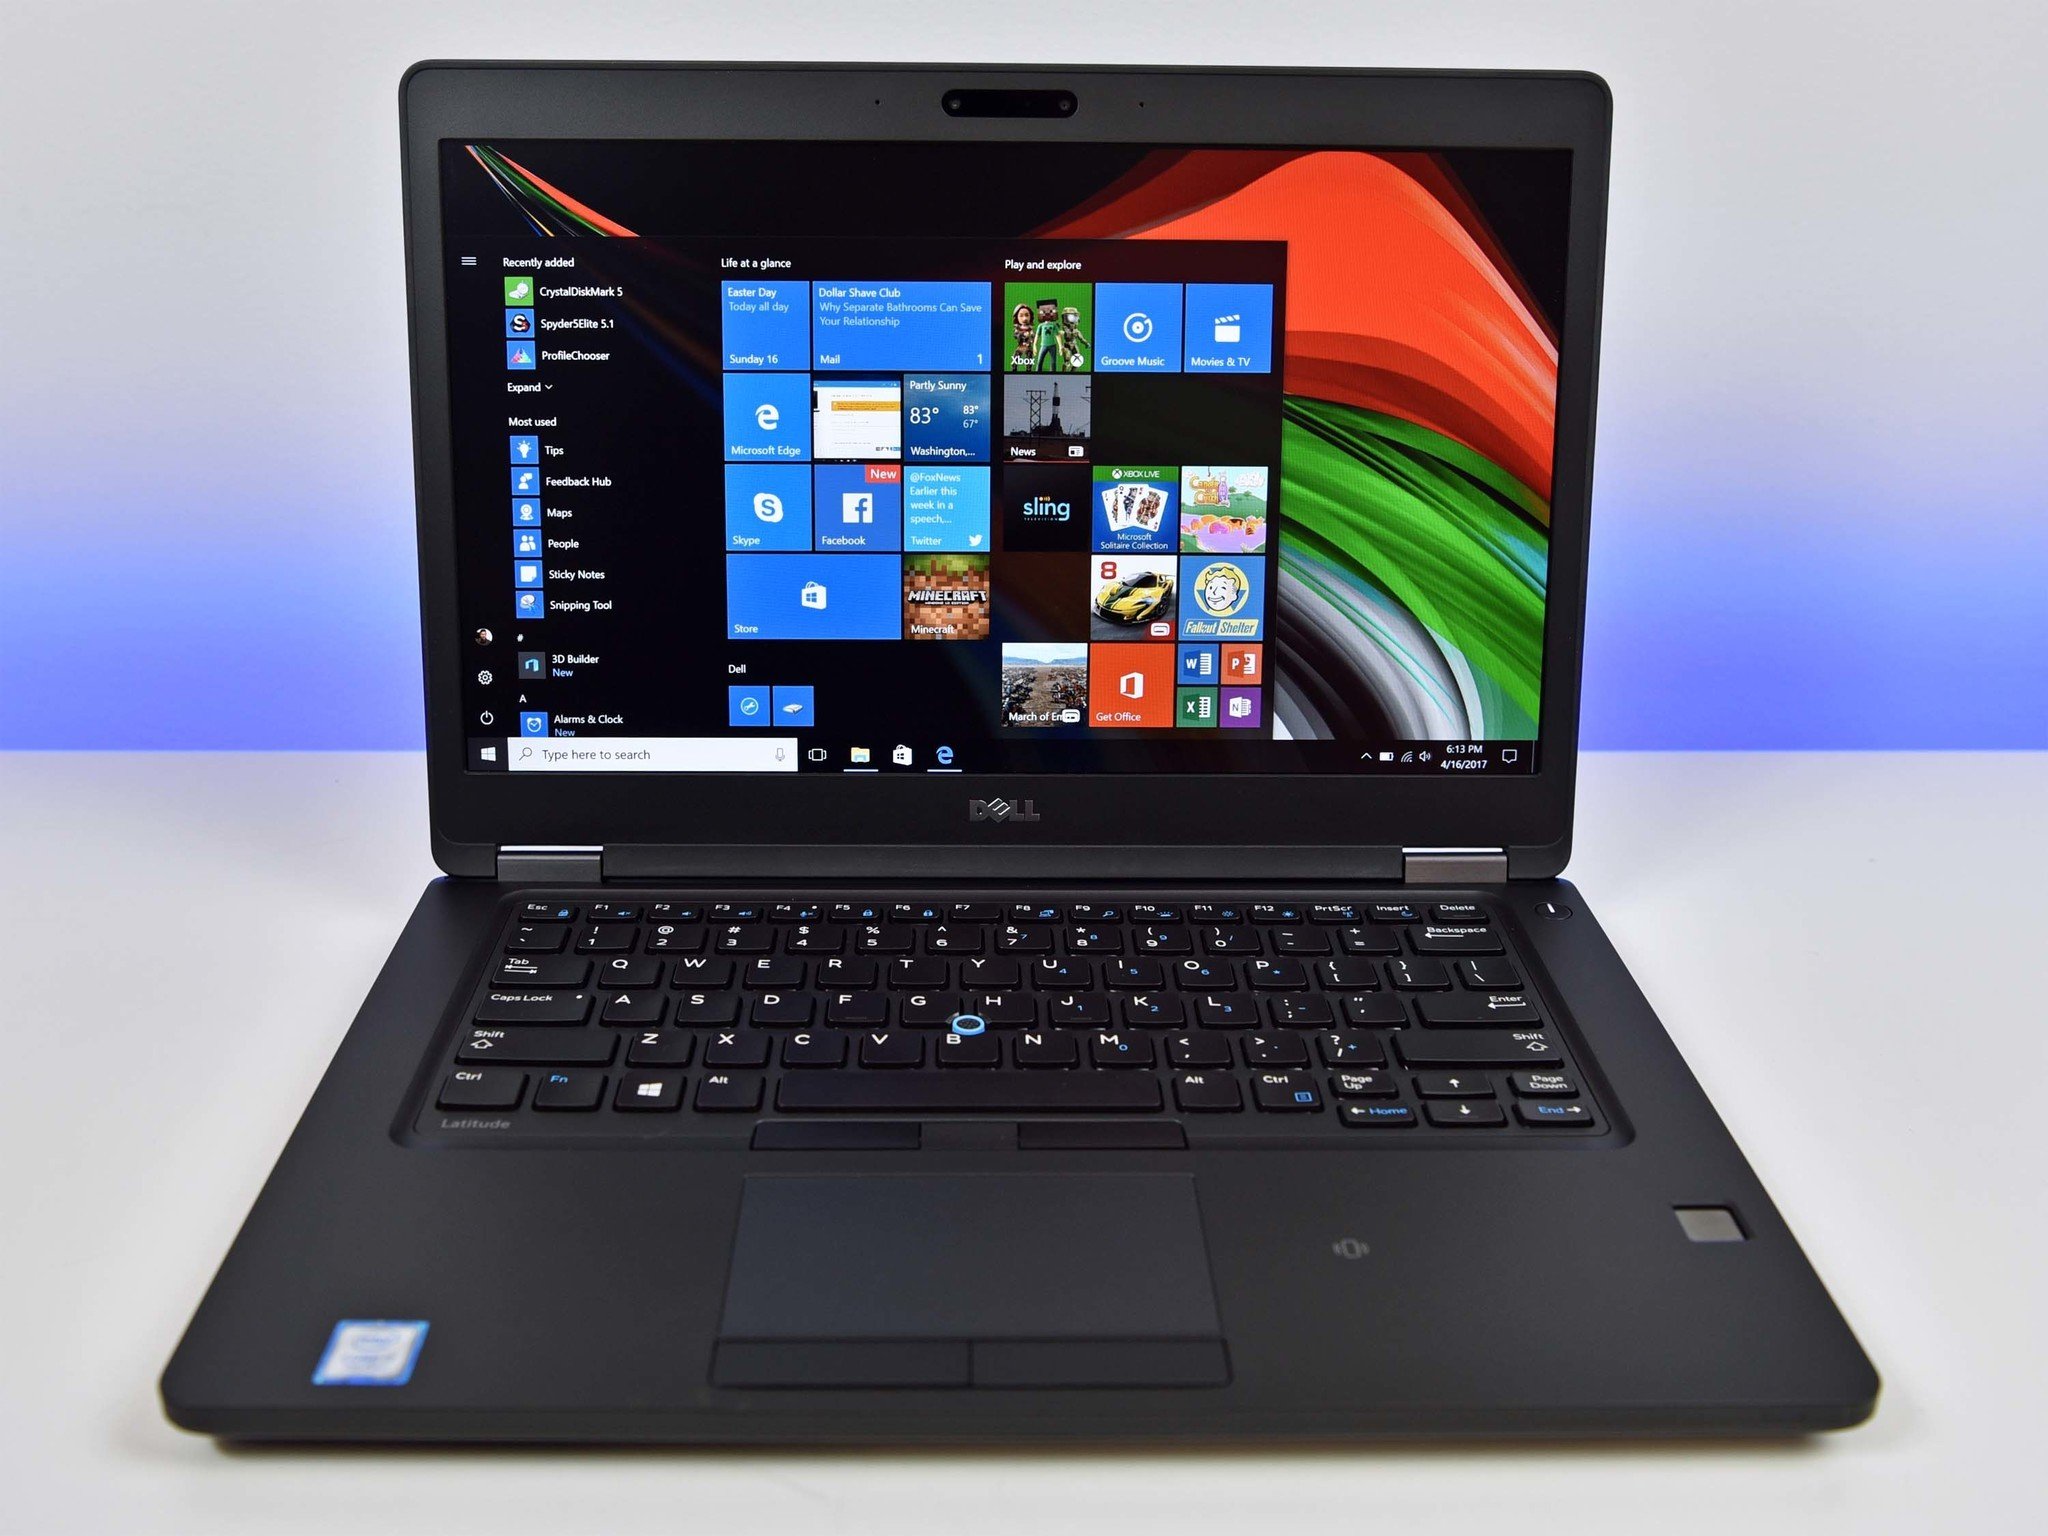 Dell Latitude 5480 review: A beastly business laptop that's built to